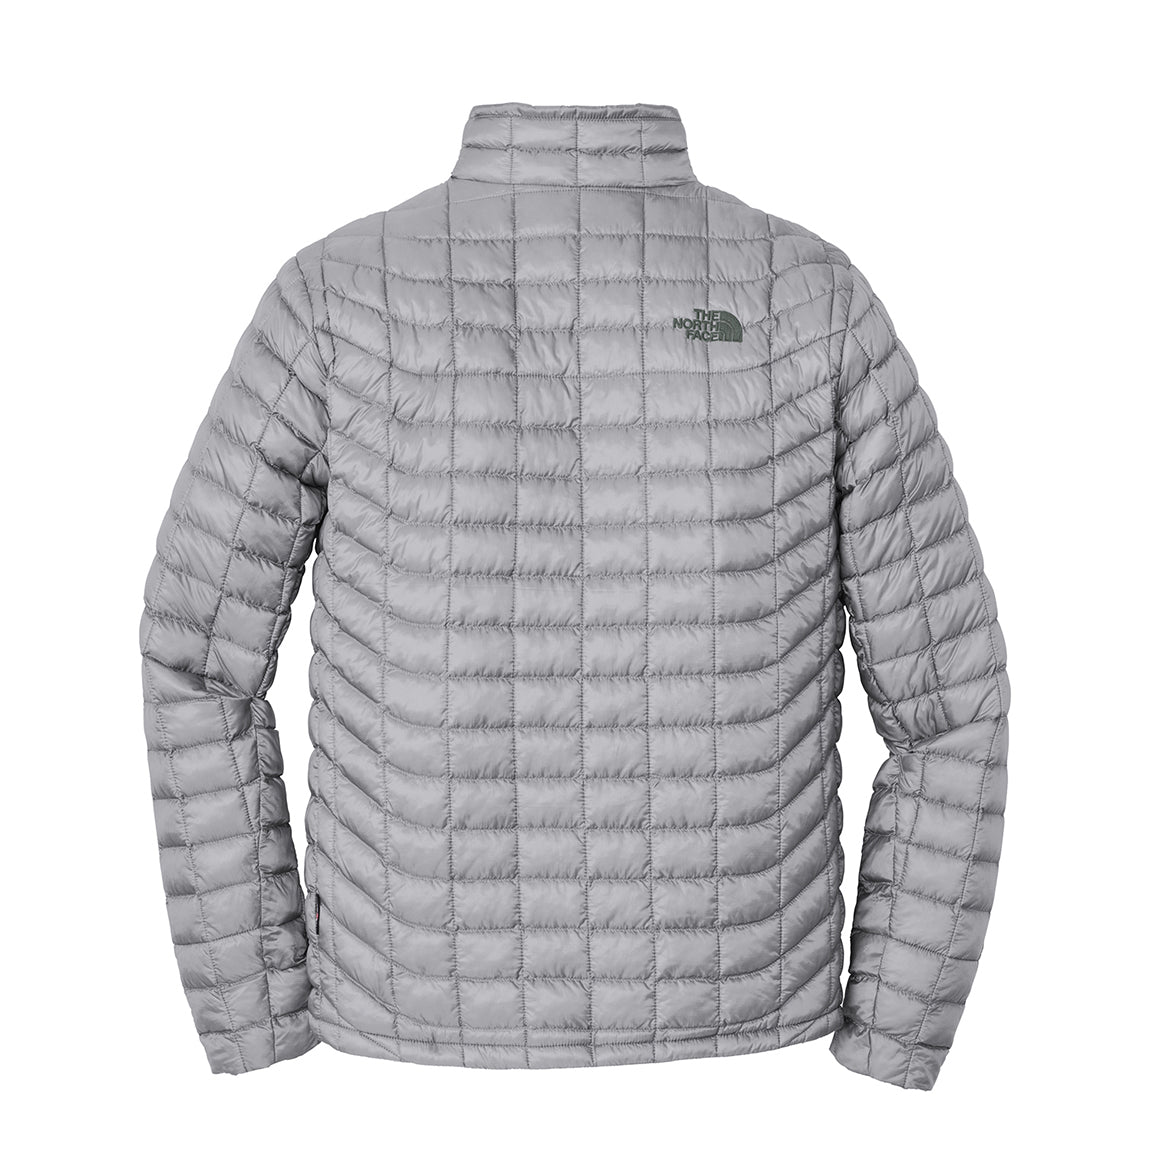 Men's North Face Thermo Jacket